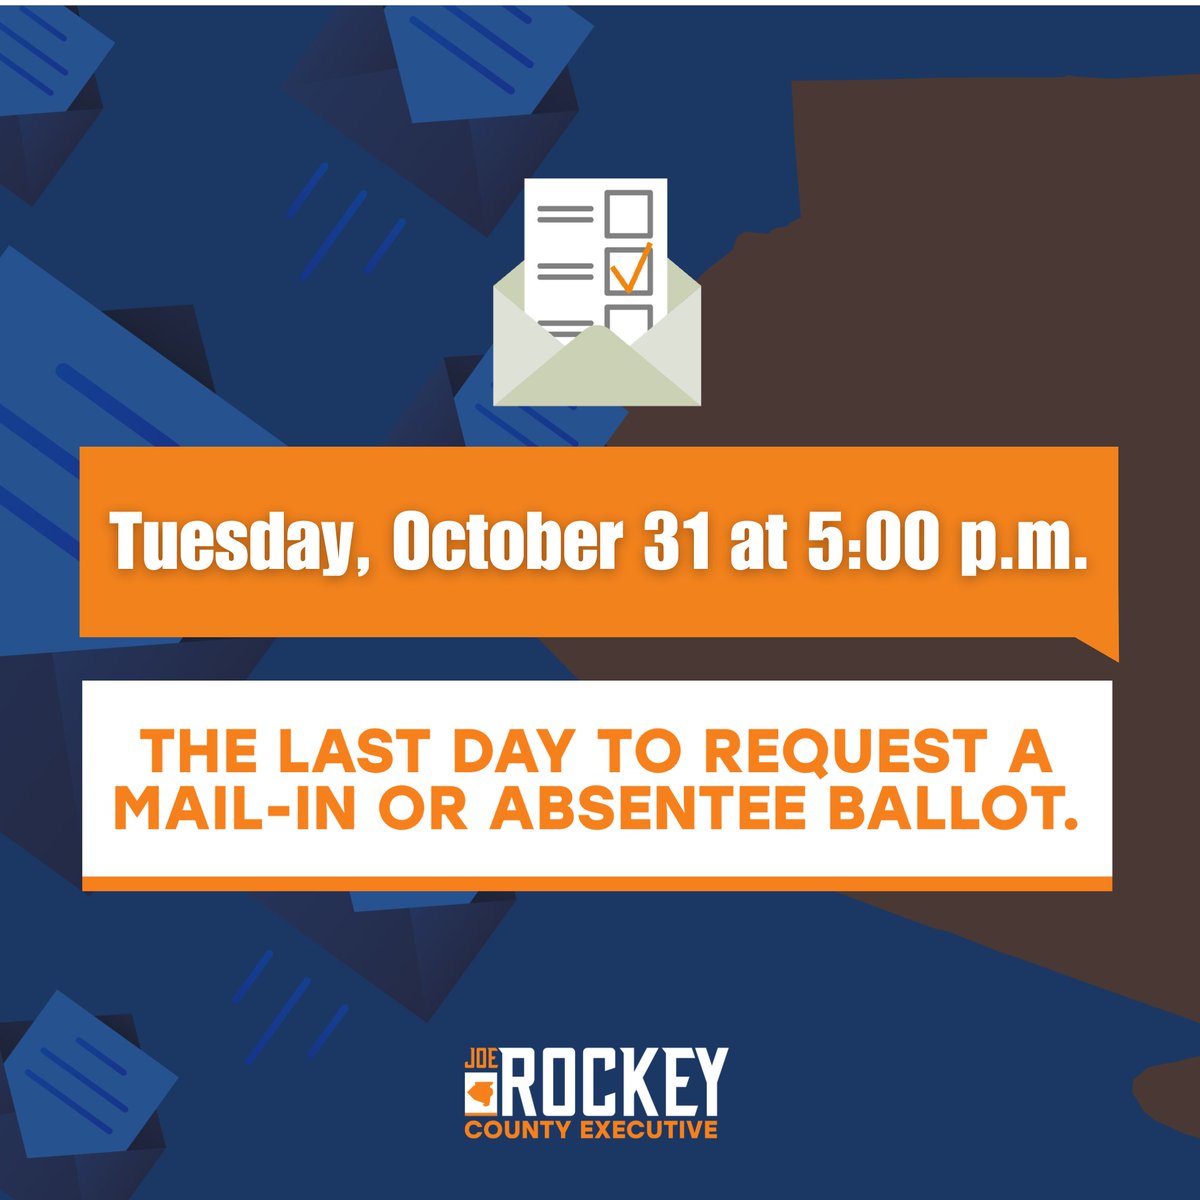 2 HOURS LEFT!

🕔 Request your mail-in ballot before 5:00 p.m. today: rockey2023.com/mail-in

#VoteRockey #FightingForAllOfUs #AlleghenyCounty